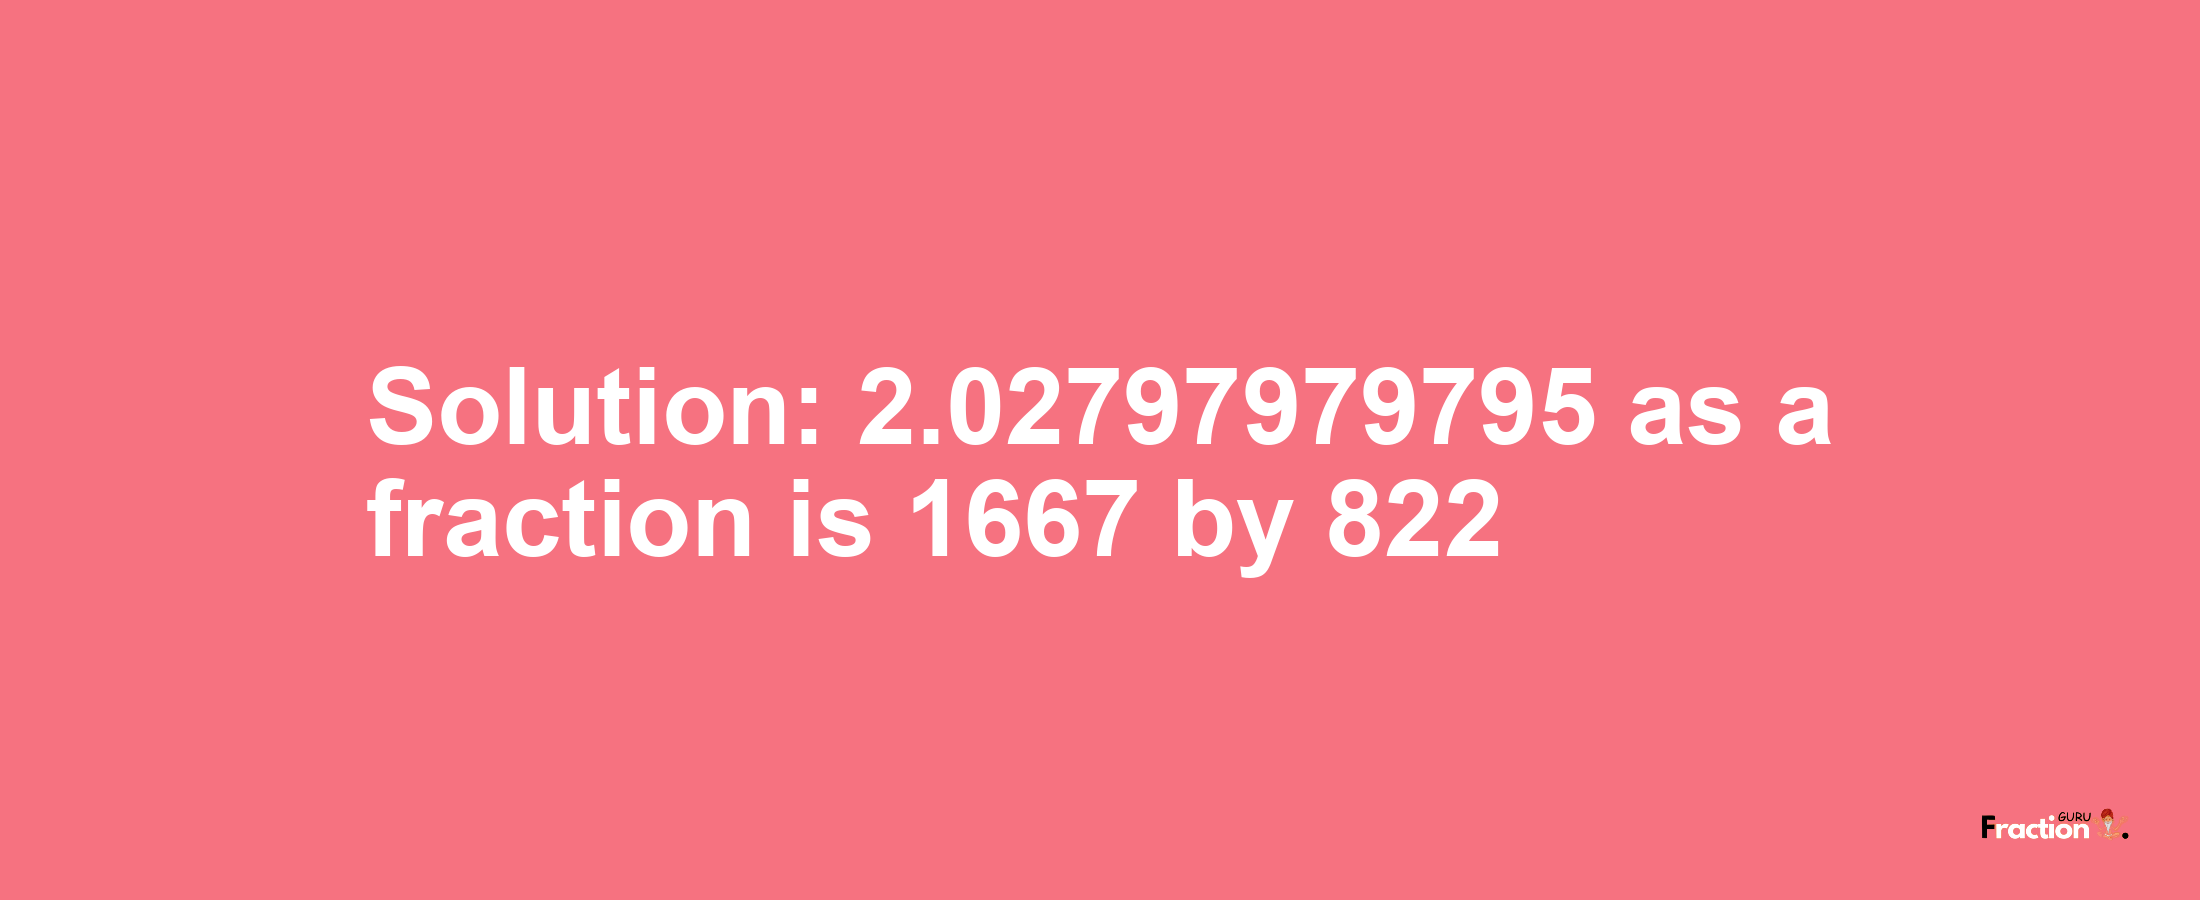 Solution:2.02797979795 as a fraction is 1667/822